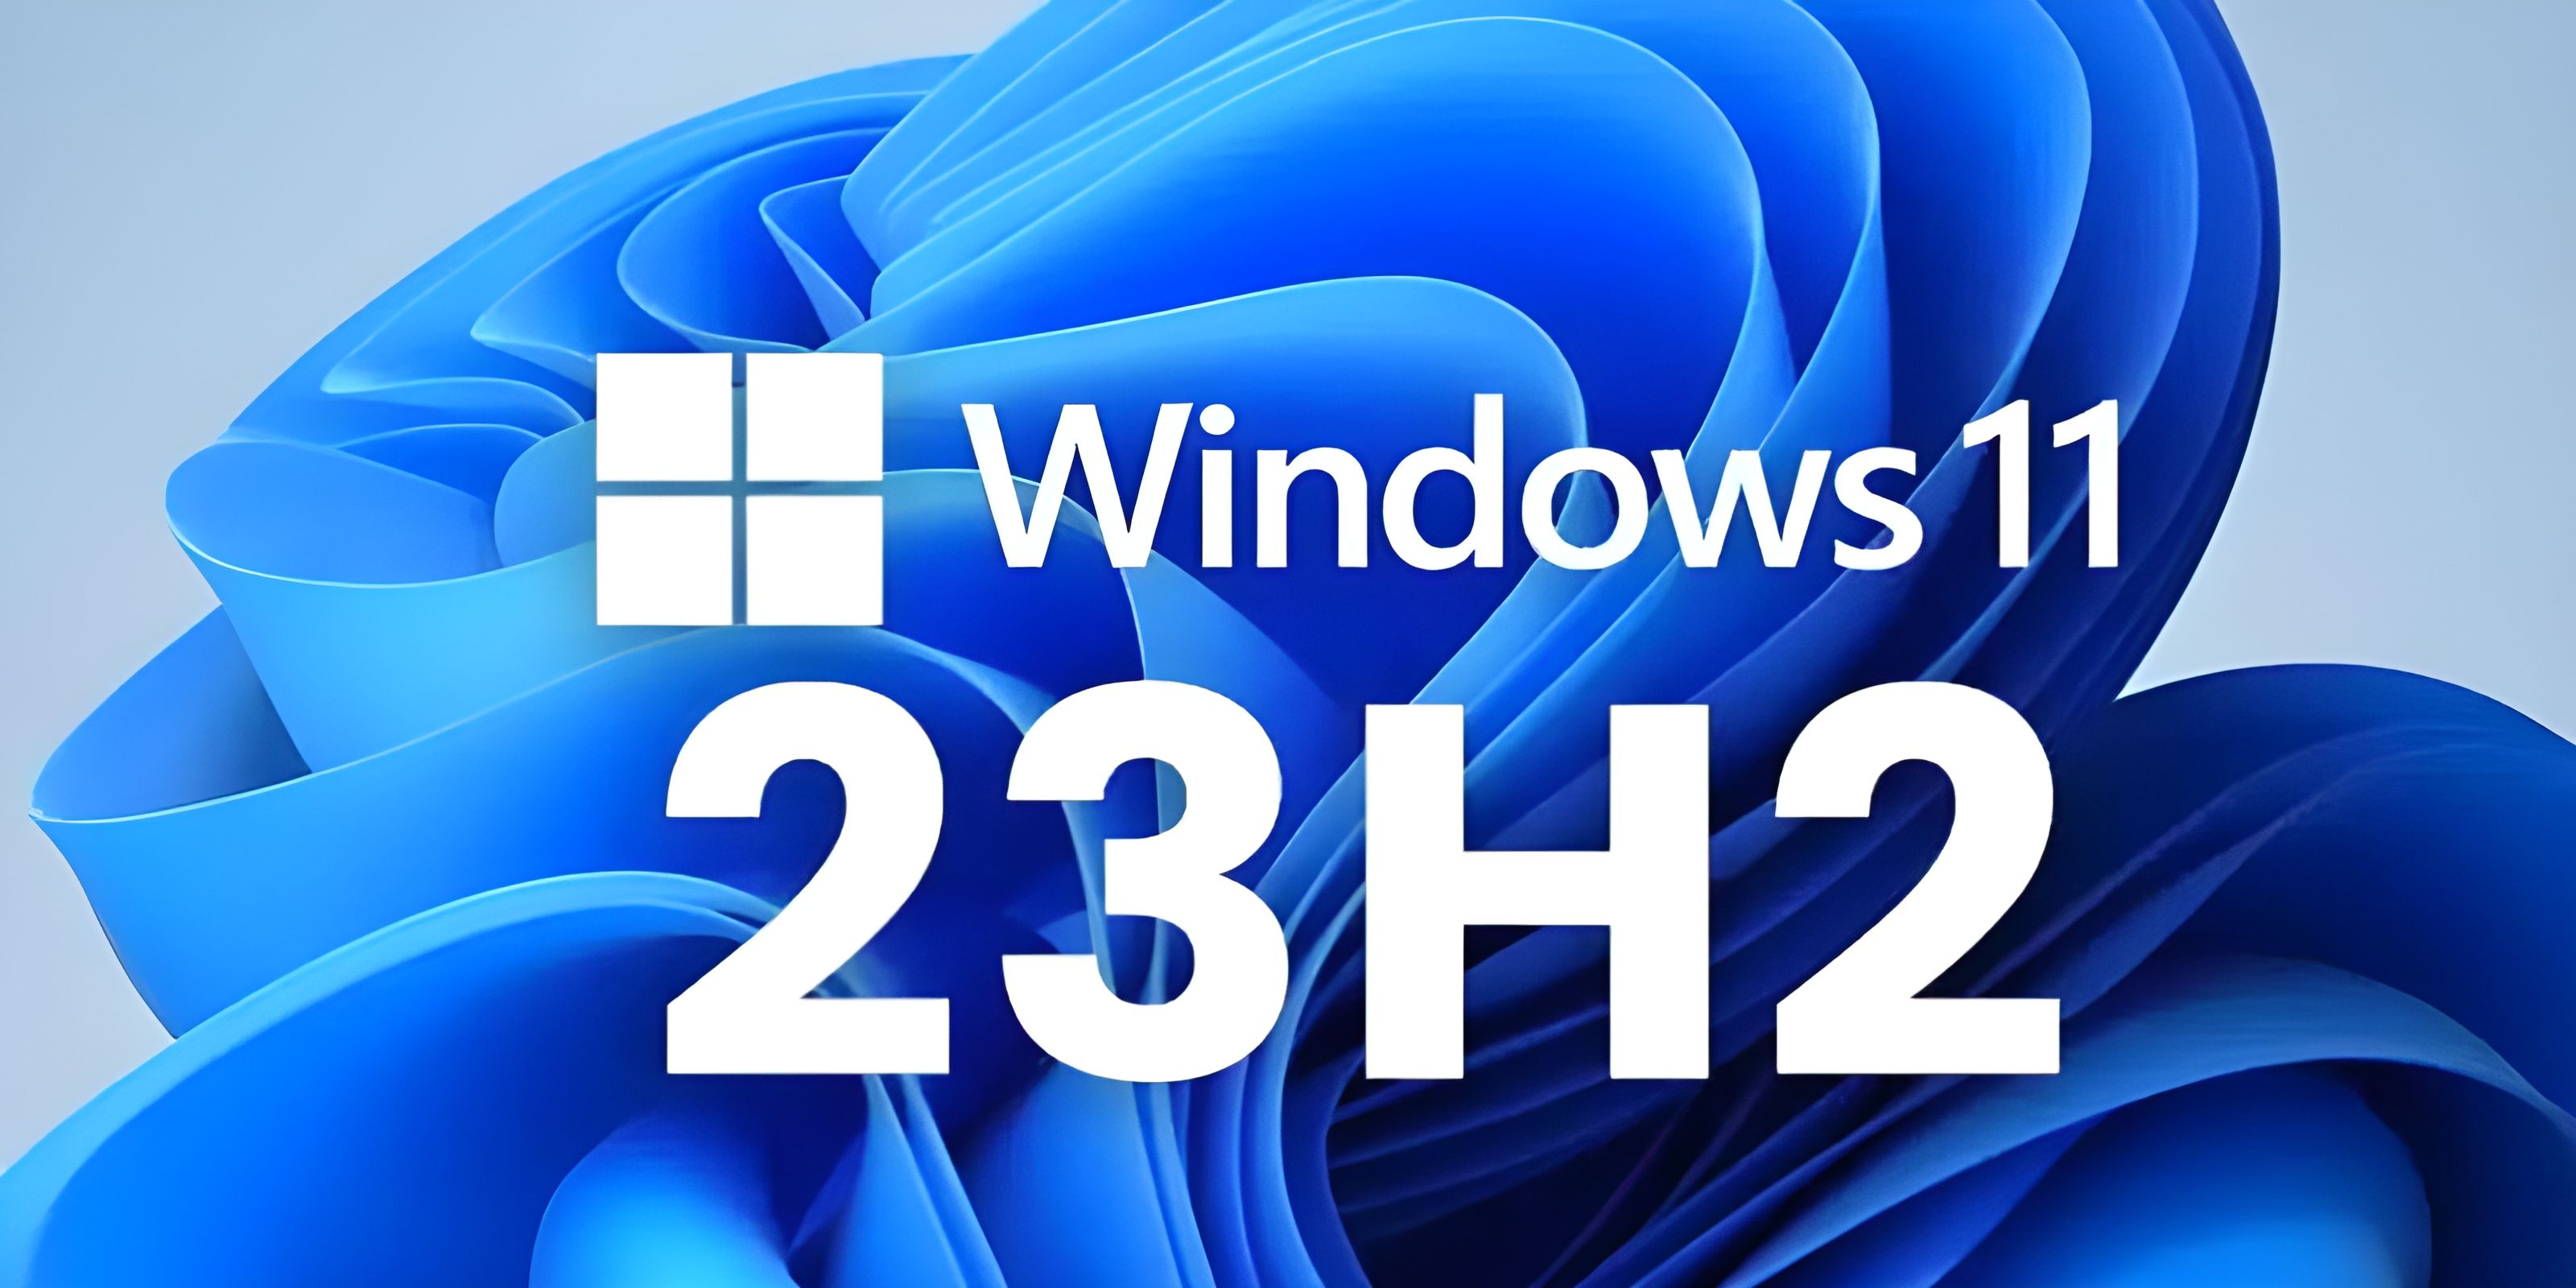 Microsoft to Unveil AI-Enhanced Features in Windows 11 23H2 Update Today